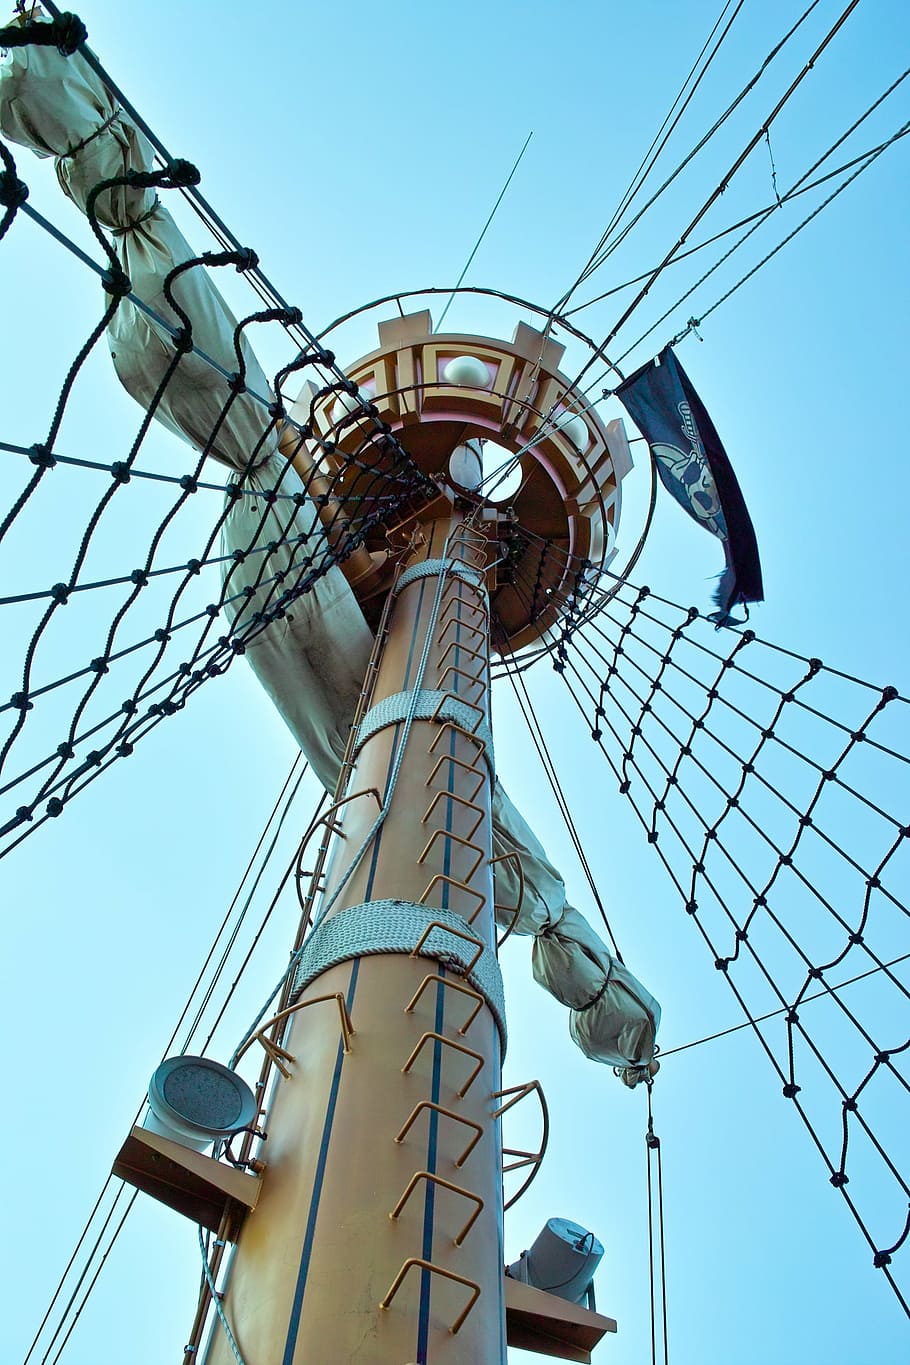 mast, pirate ship, pirate flag, low angle view, sky, nature, clear sky, day, metal, built structure